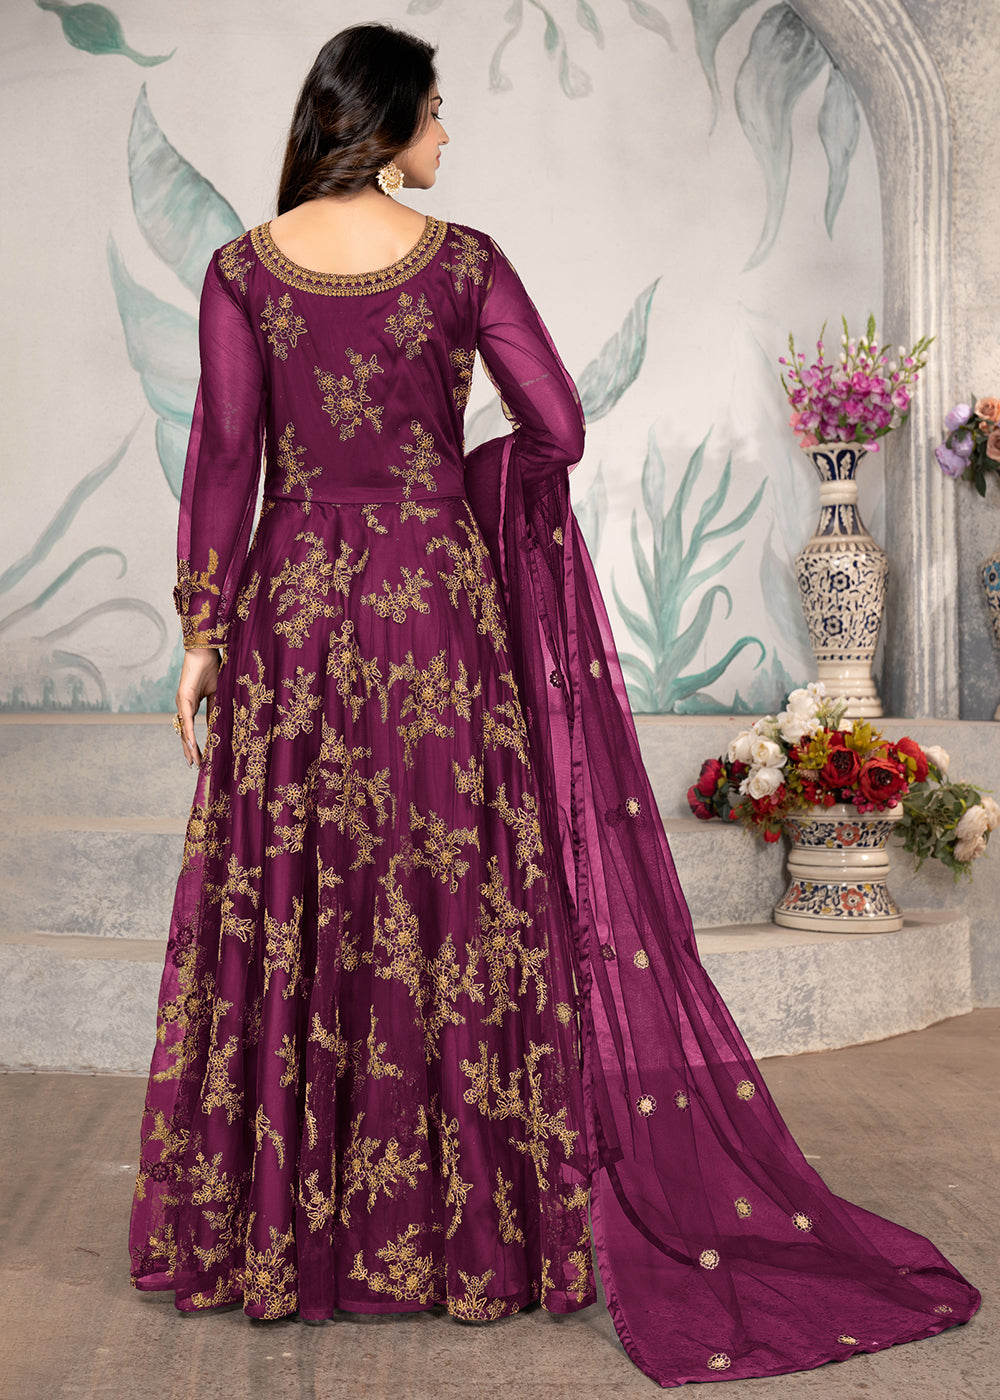 Buy Now Party Wear Magenta Thread & Sequins Work Anarkali Suit Online in USA, UK, Australia, New Zealand, Canada, Italy & Worldwide at Empress Clothing.